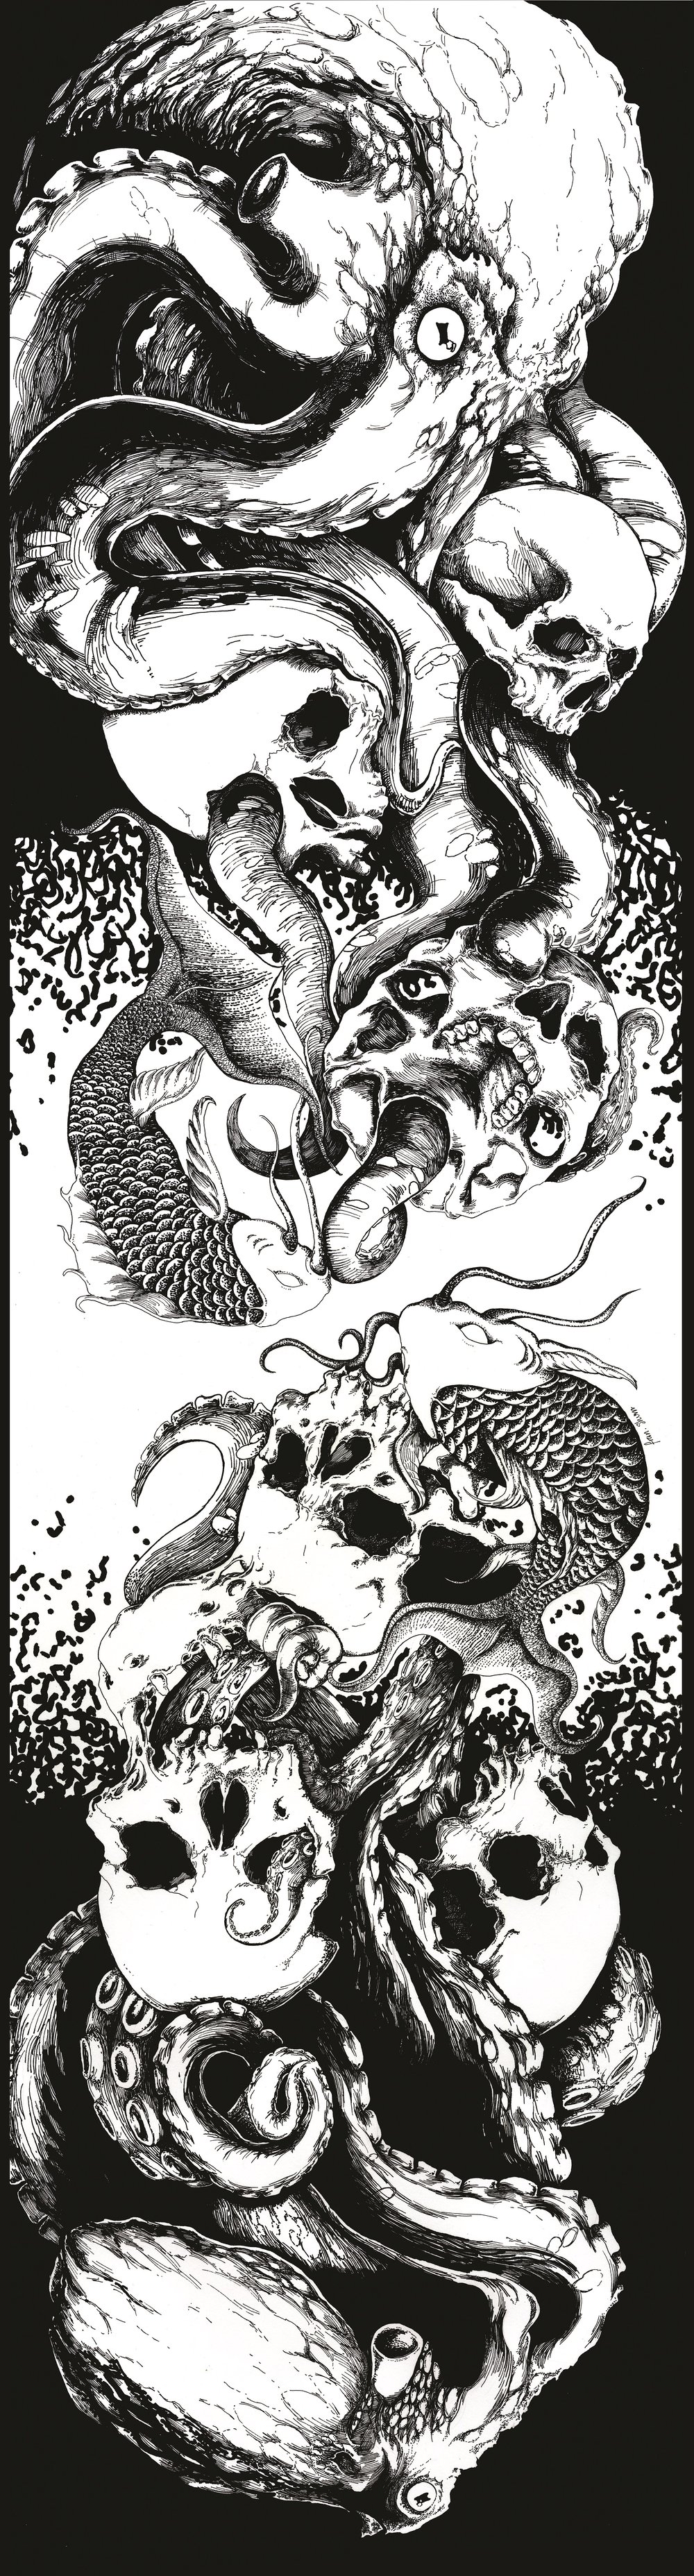 Image of Koi and Skull Limited print